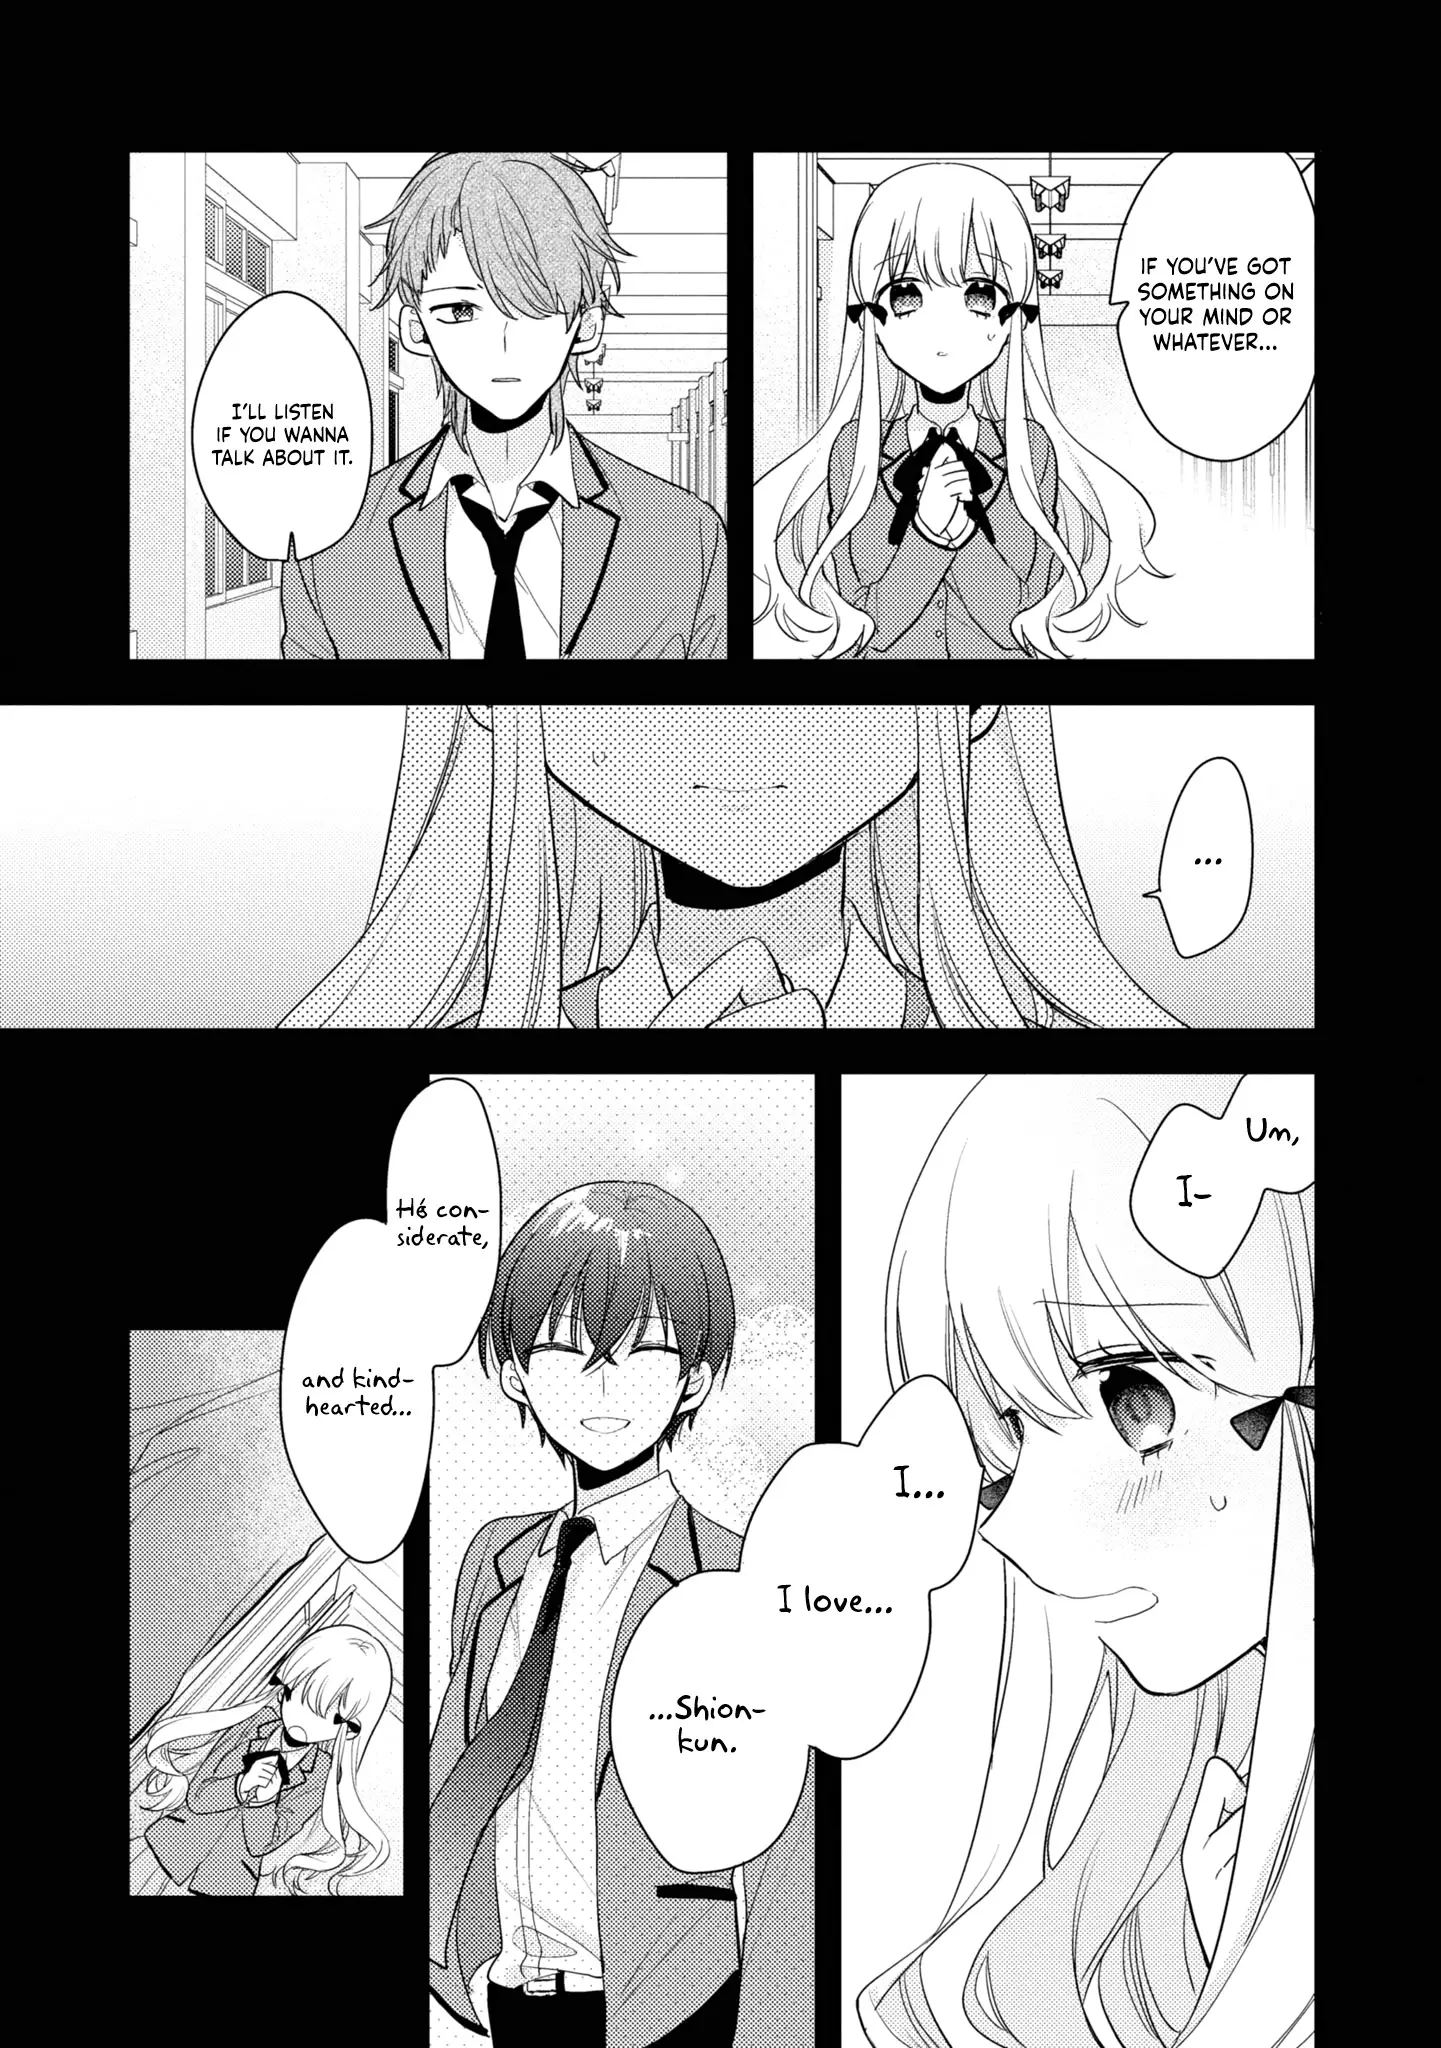 I Have A Second Chance At Life, So I’Ll Pamper My Yandere Boyfriend For A Happy Ending!! - 2 page 24-c56eb723